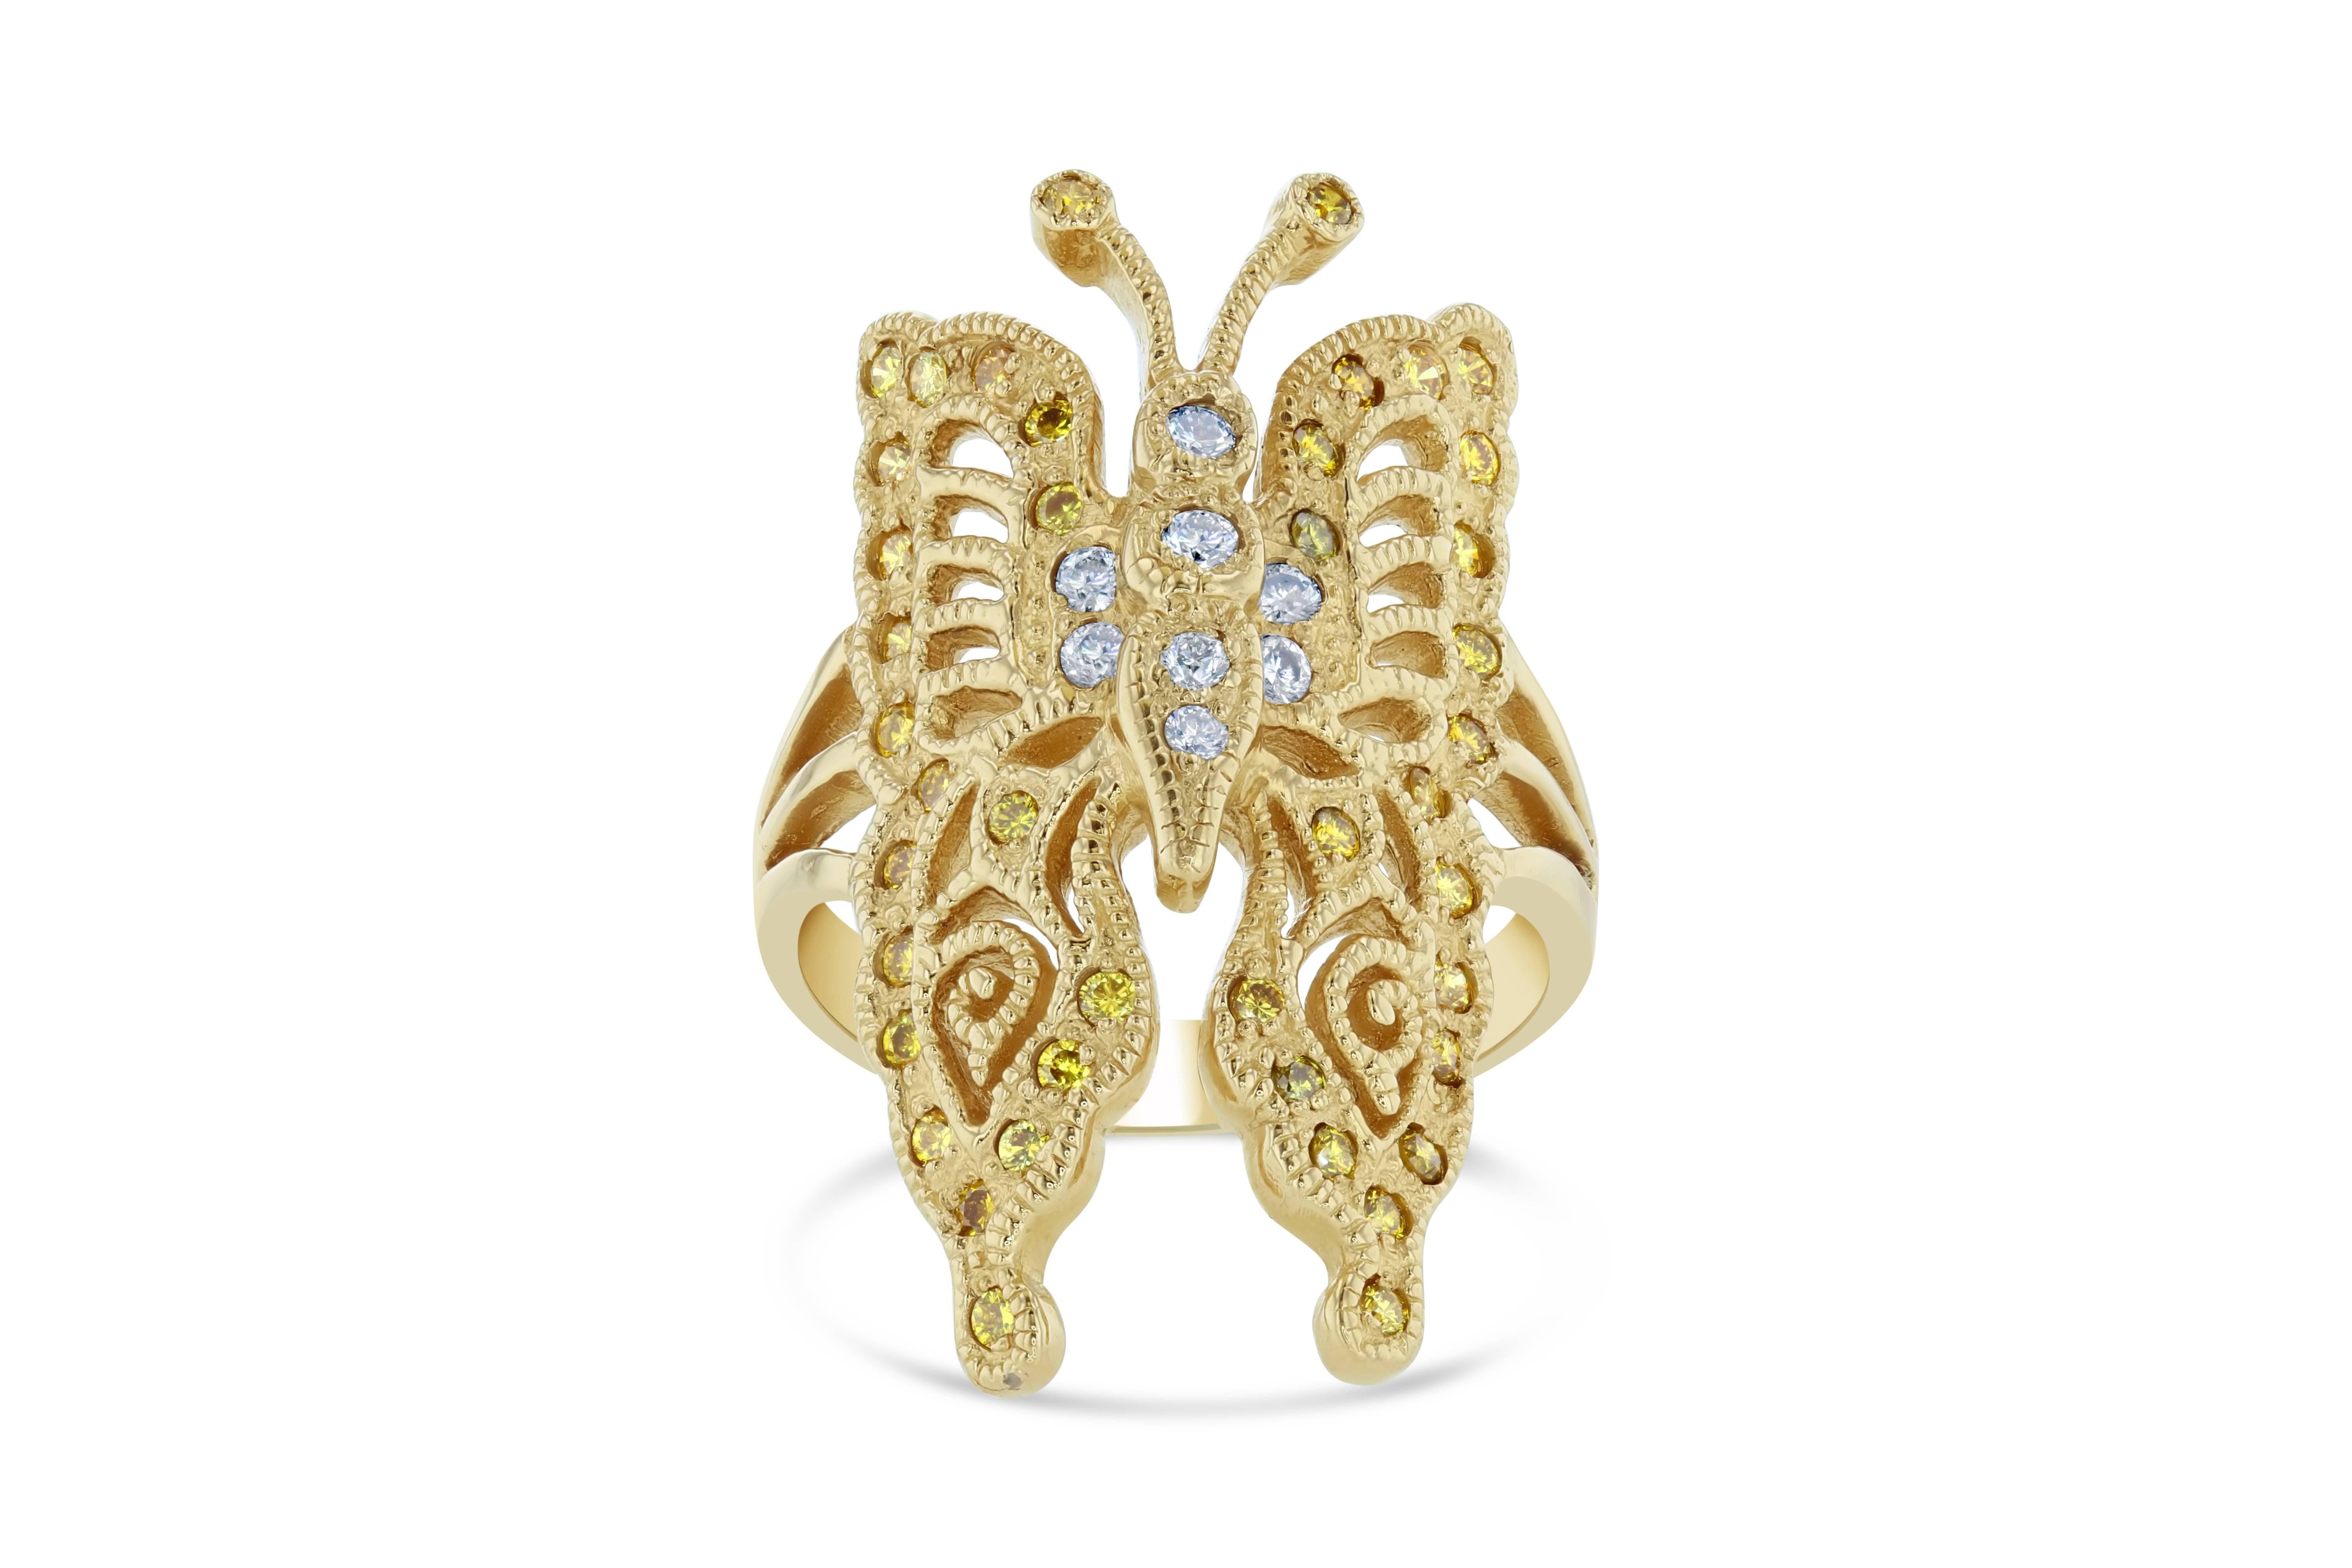 A gorgeous cocktail ring that is shaped like a butterfly that will gently sit on your finger!

The ring has 40 Yellow Diamonds weighing 0.51 Carats and 8 Round Cut Diamonds that weigh 0.18 Carats. The total carat weight of the ring is 0.69 Carats.